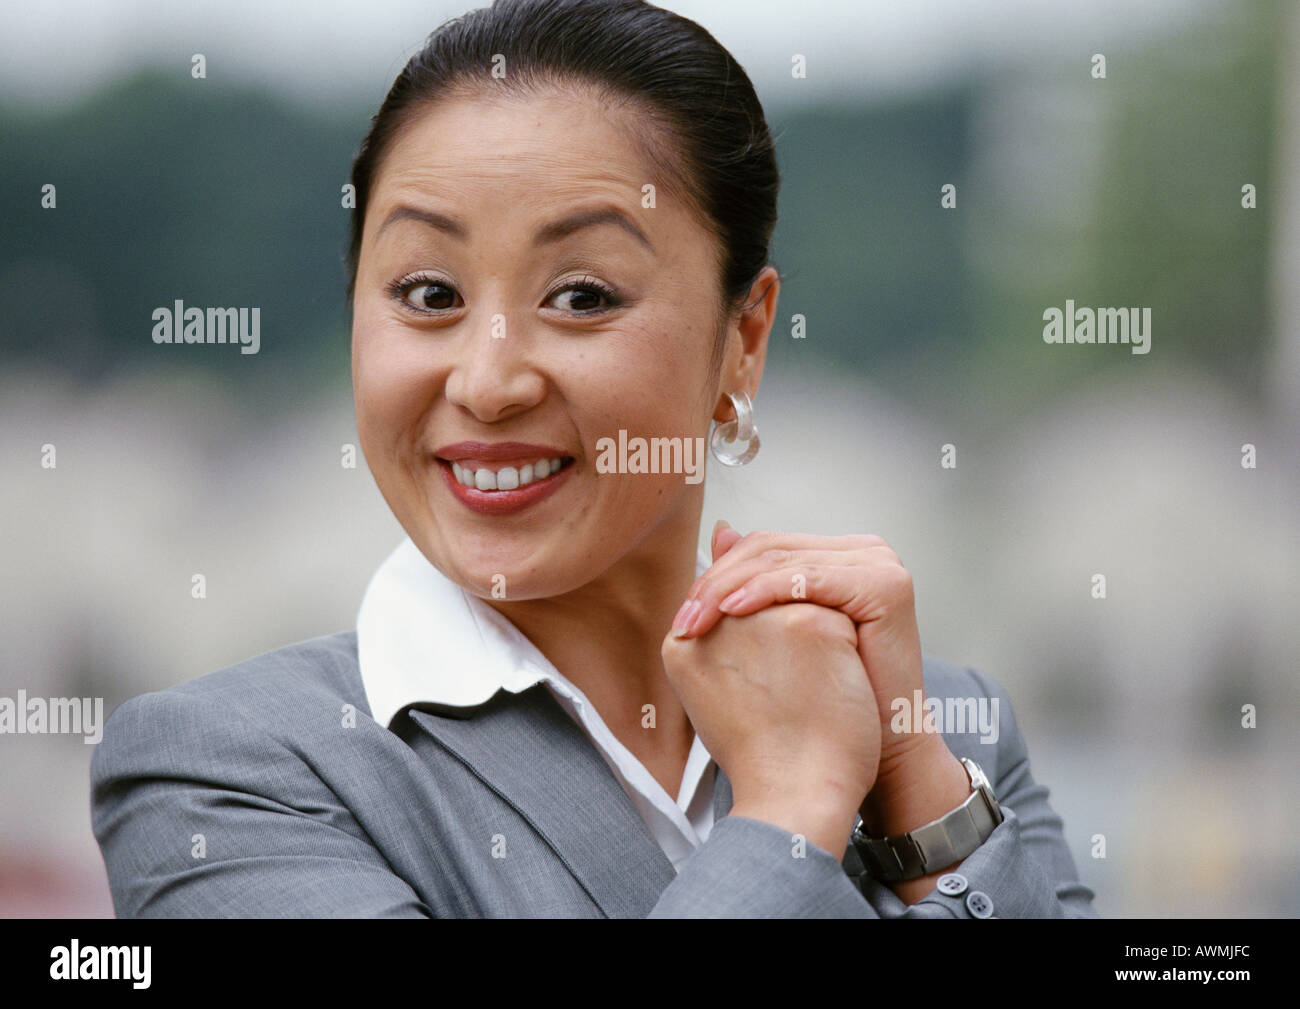 Businesswoman smiling, hands together, portrait Stock Photo